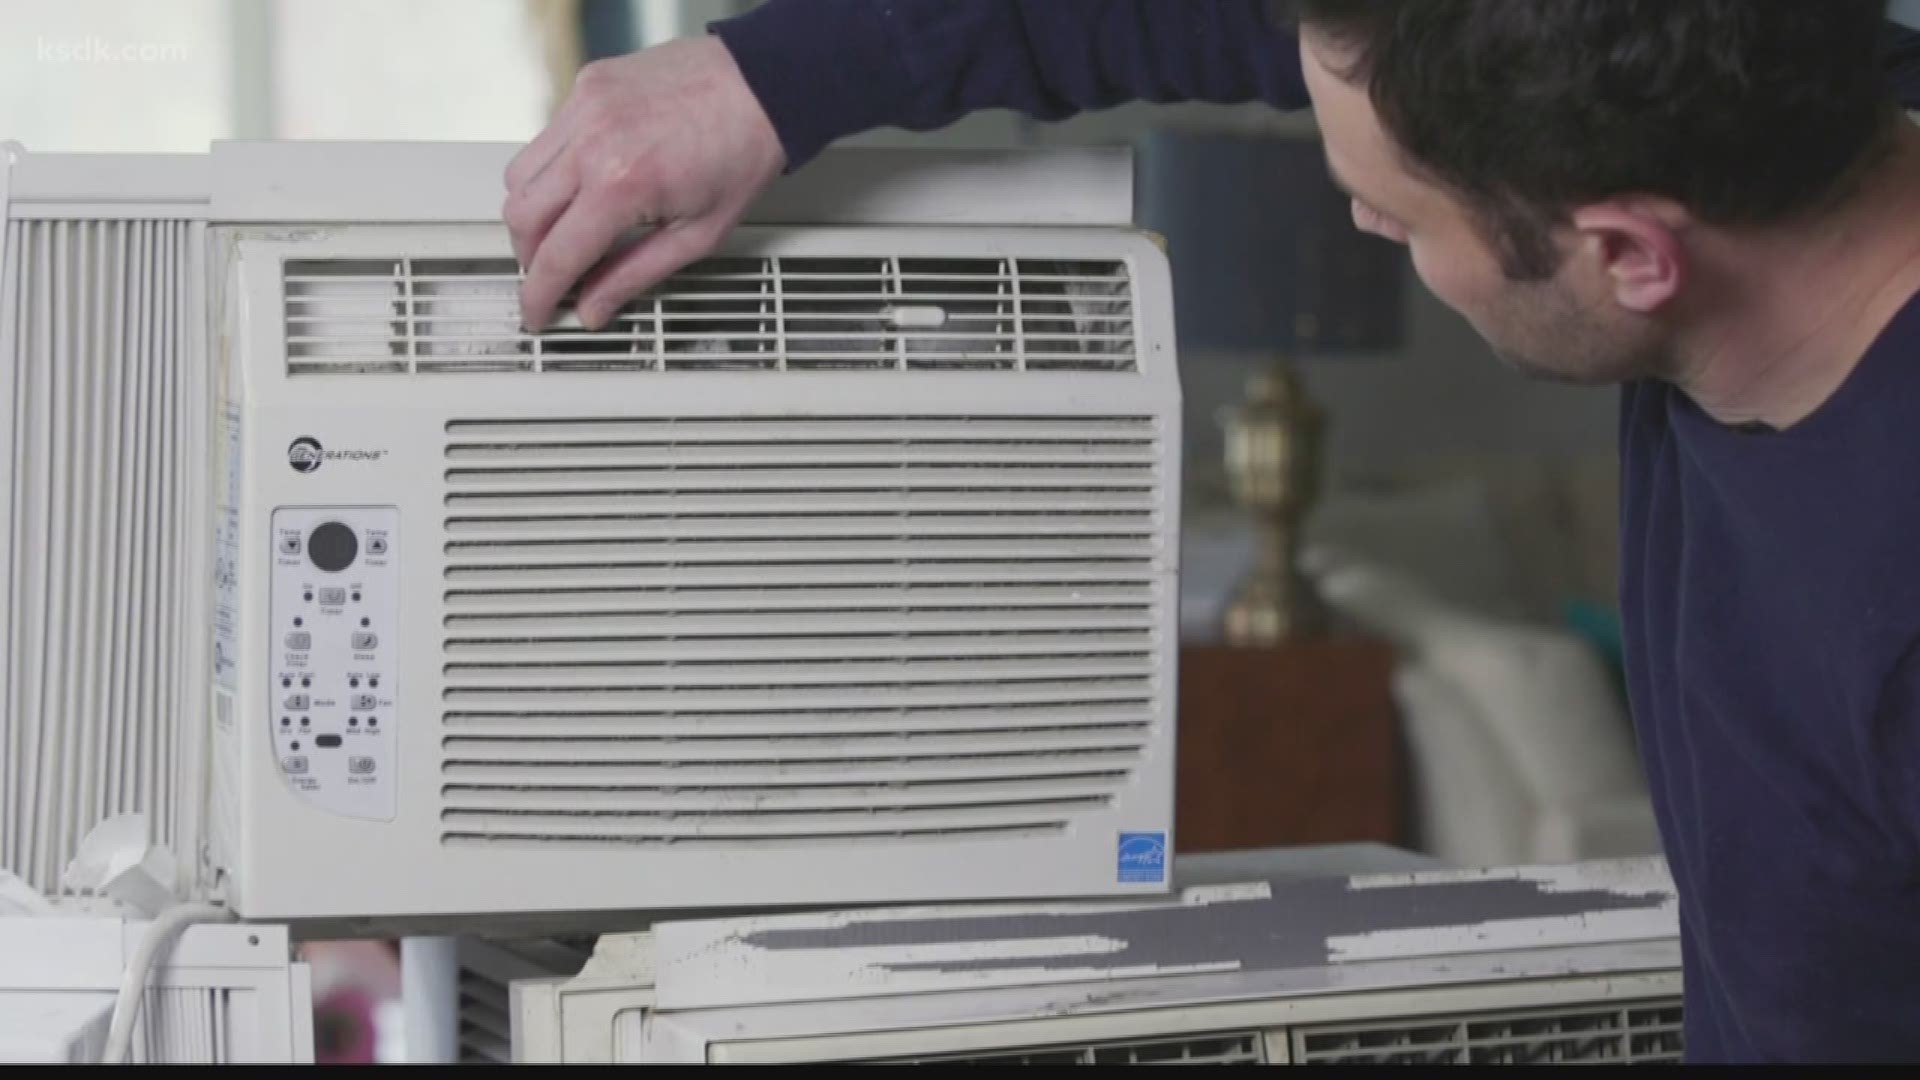 Consumer Reports says that cool air isn't the only thing your air conditioner may be spreading.